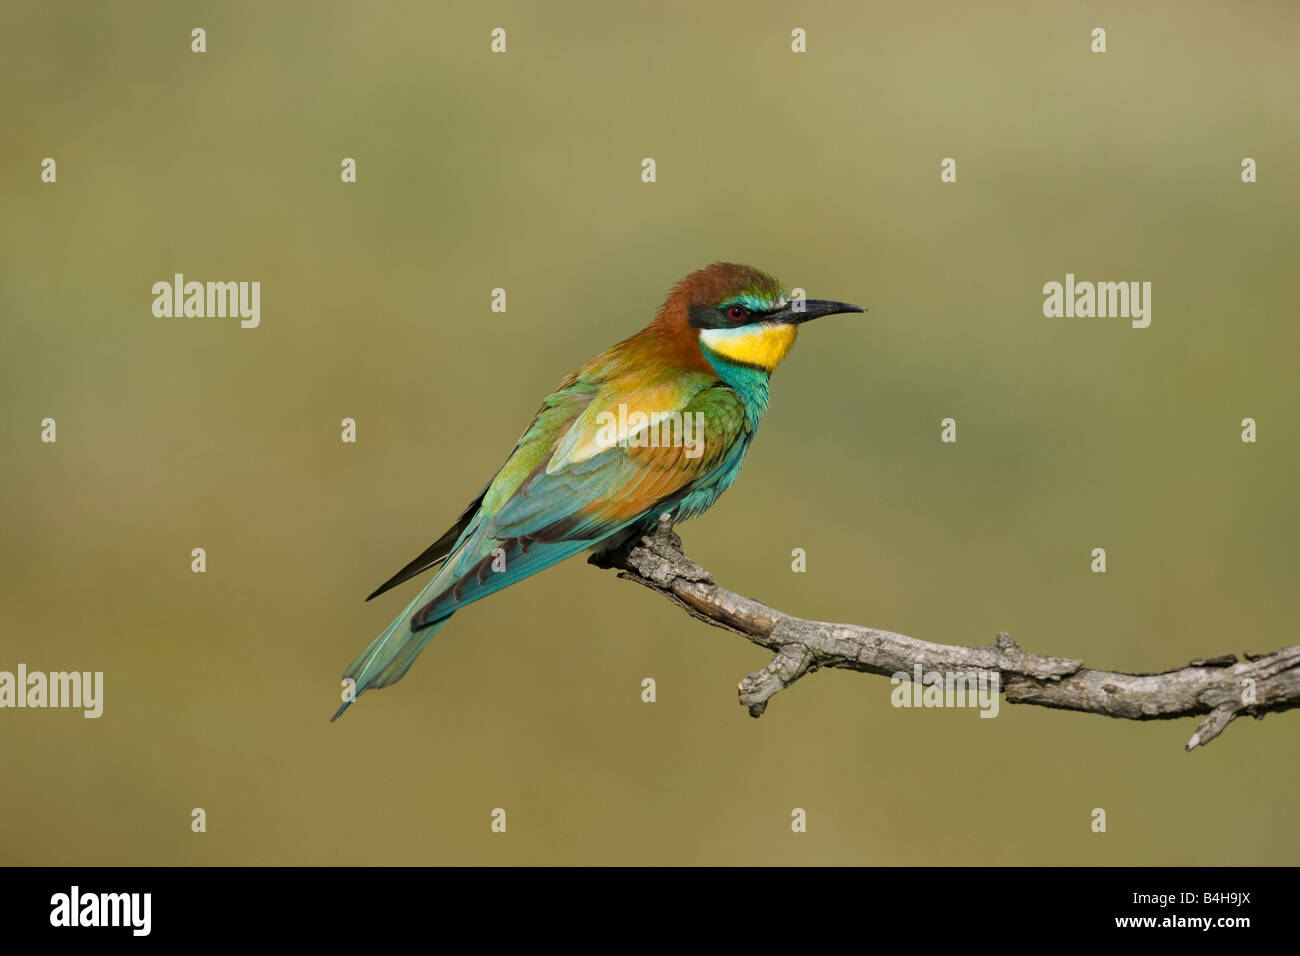 Close-up of European Bee-eater (Merops apiaster) perching on branch, Hungary Stock Photo